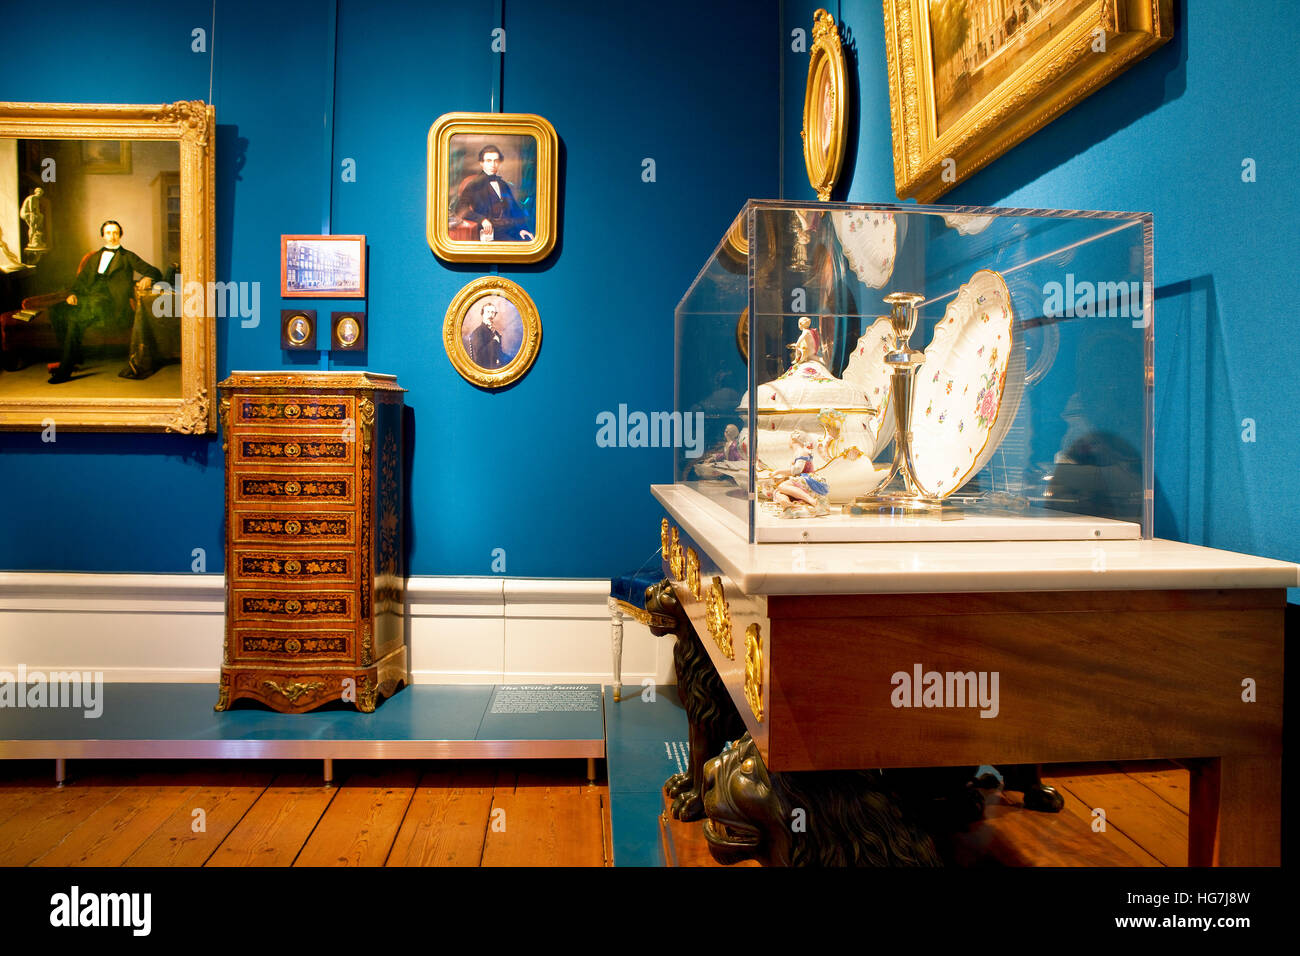 Willet-Holthuysen museum, Amsterdam Stock Photo